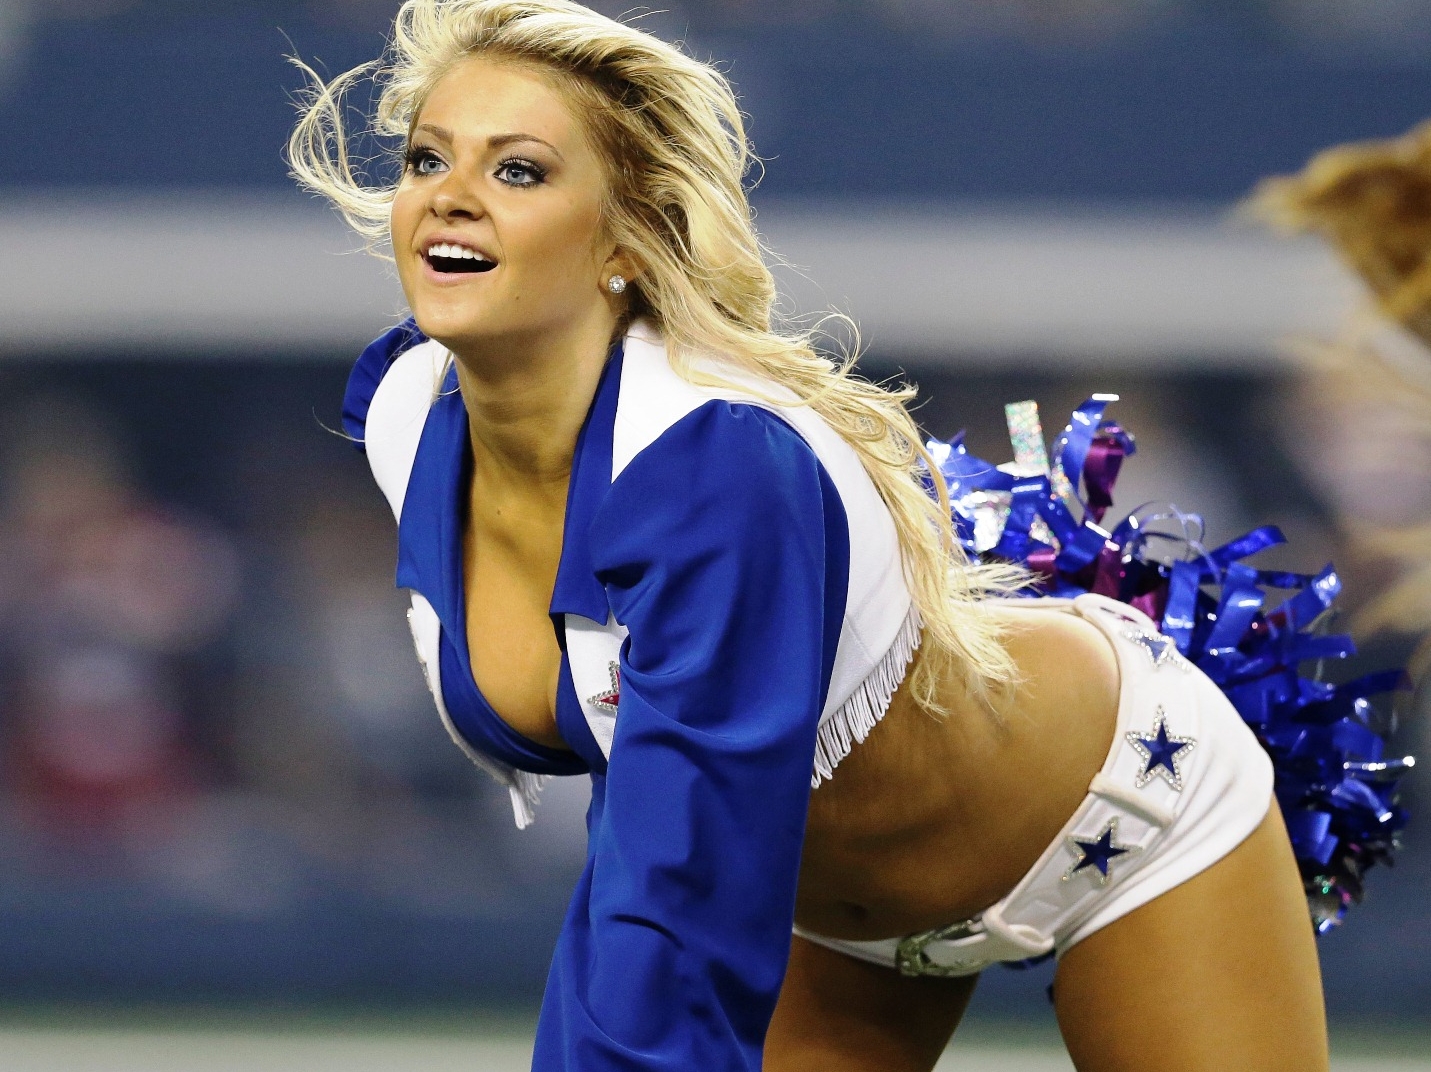 Dallas Cowboys cheerleaders sizzle during the NFL game against Washington R...